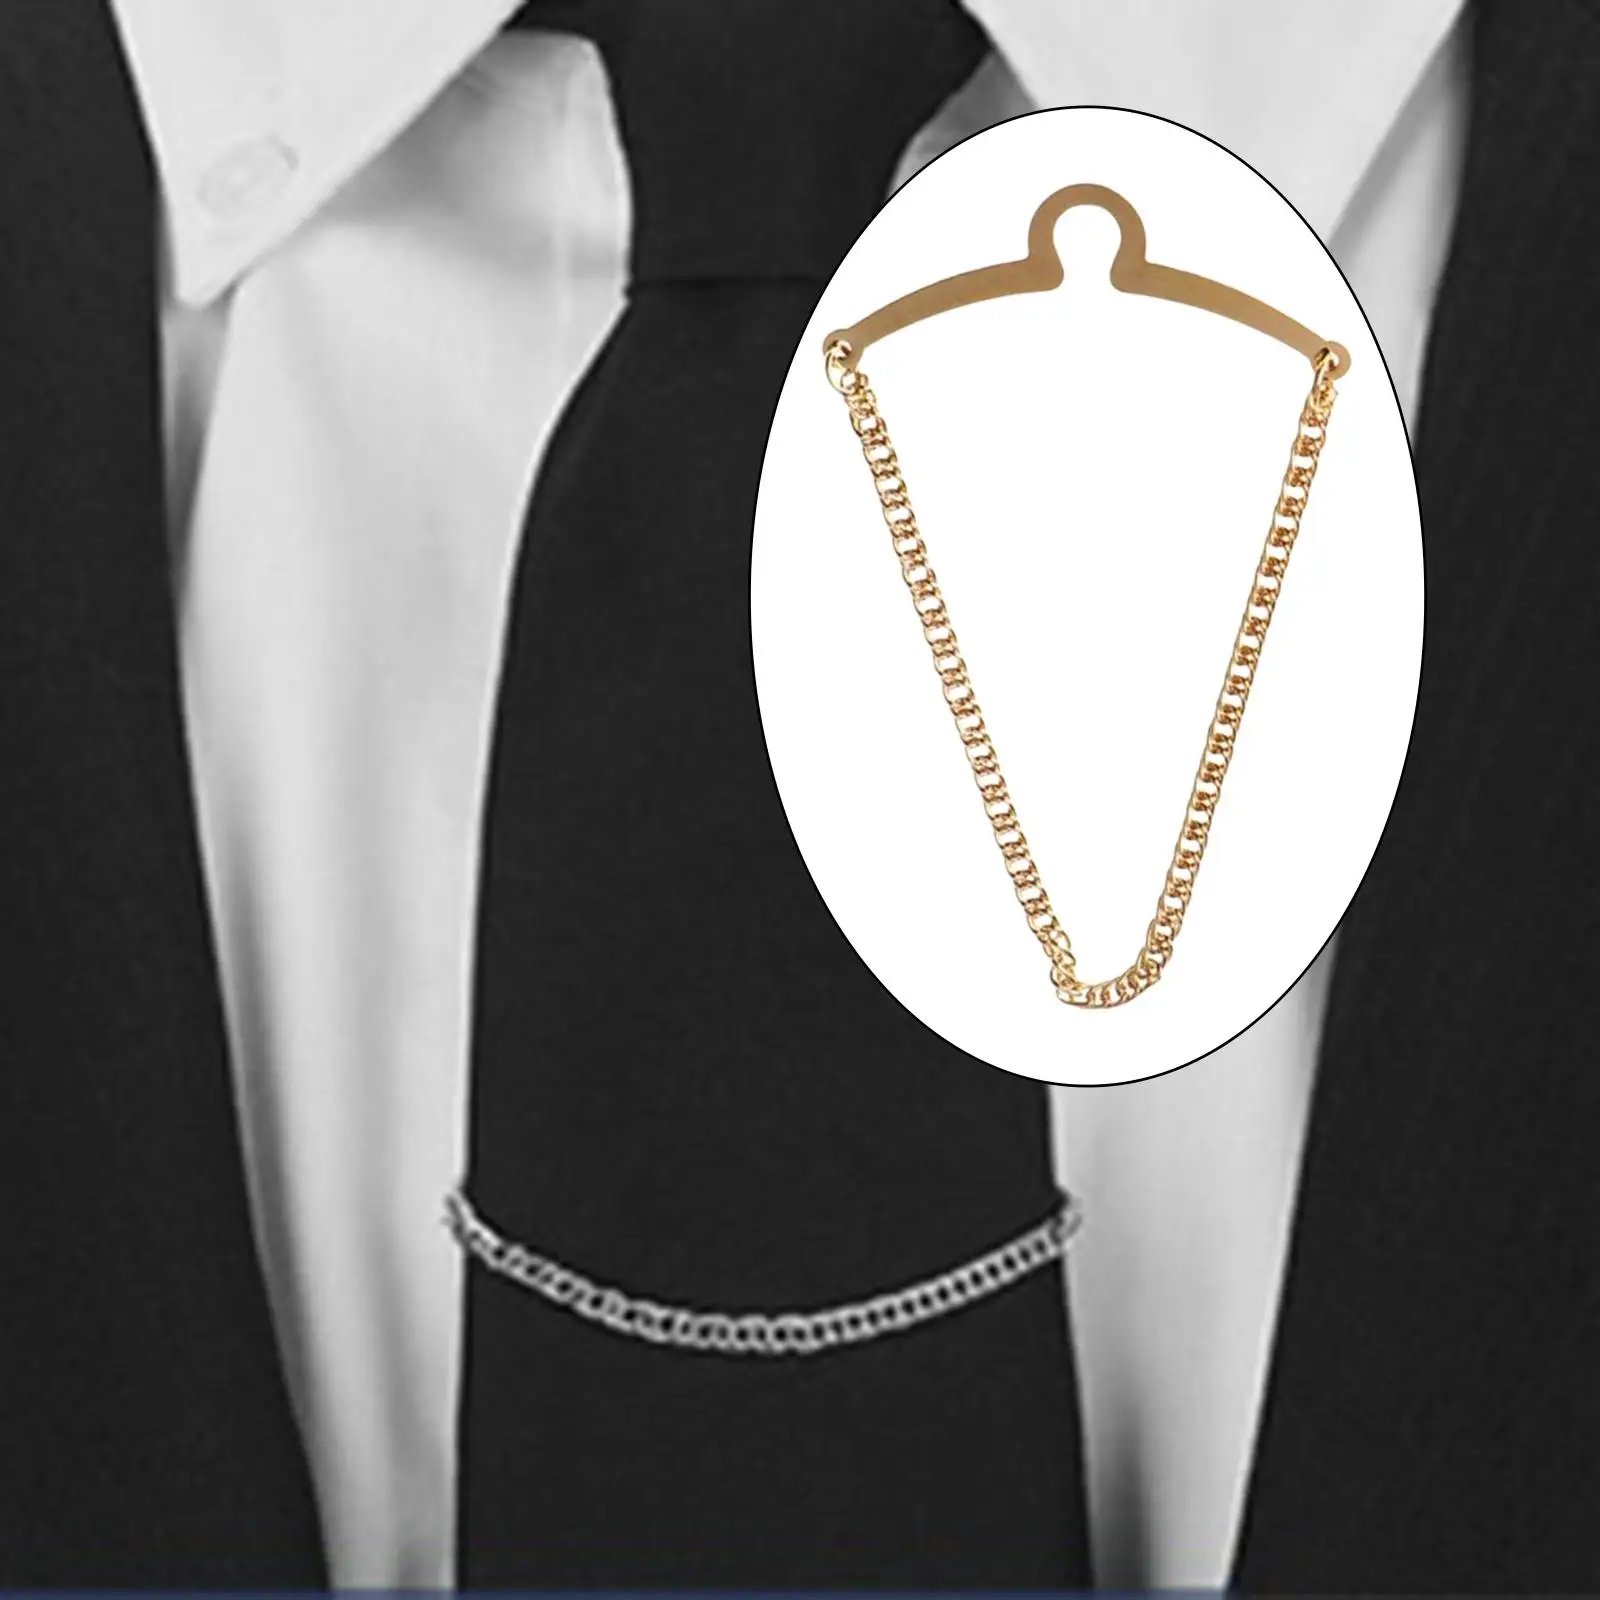 Men Tie Chain Button Attachment Tie Clips for Business Wedding Party Engagement Gift